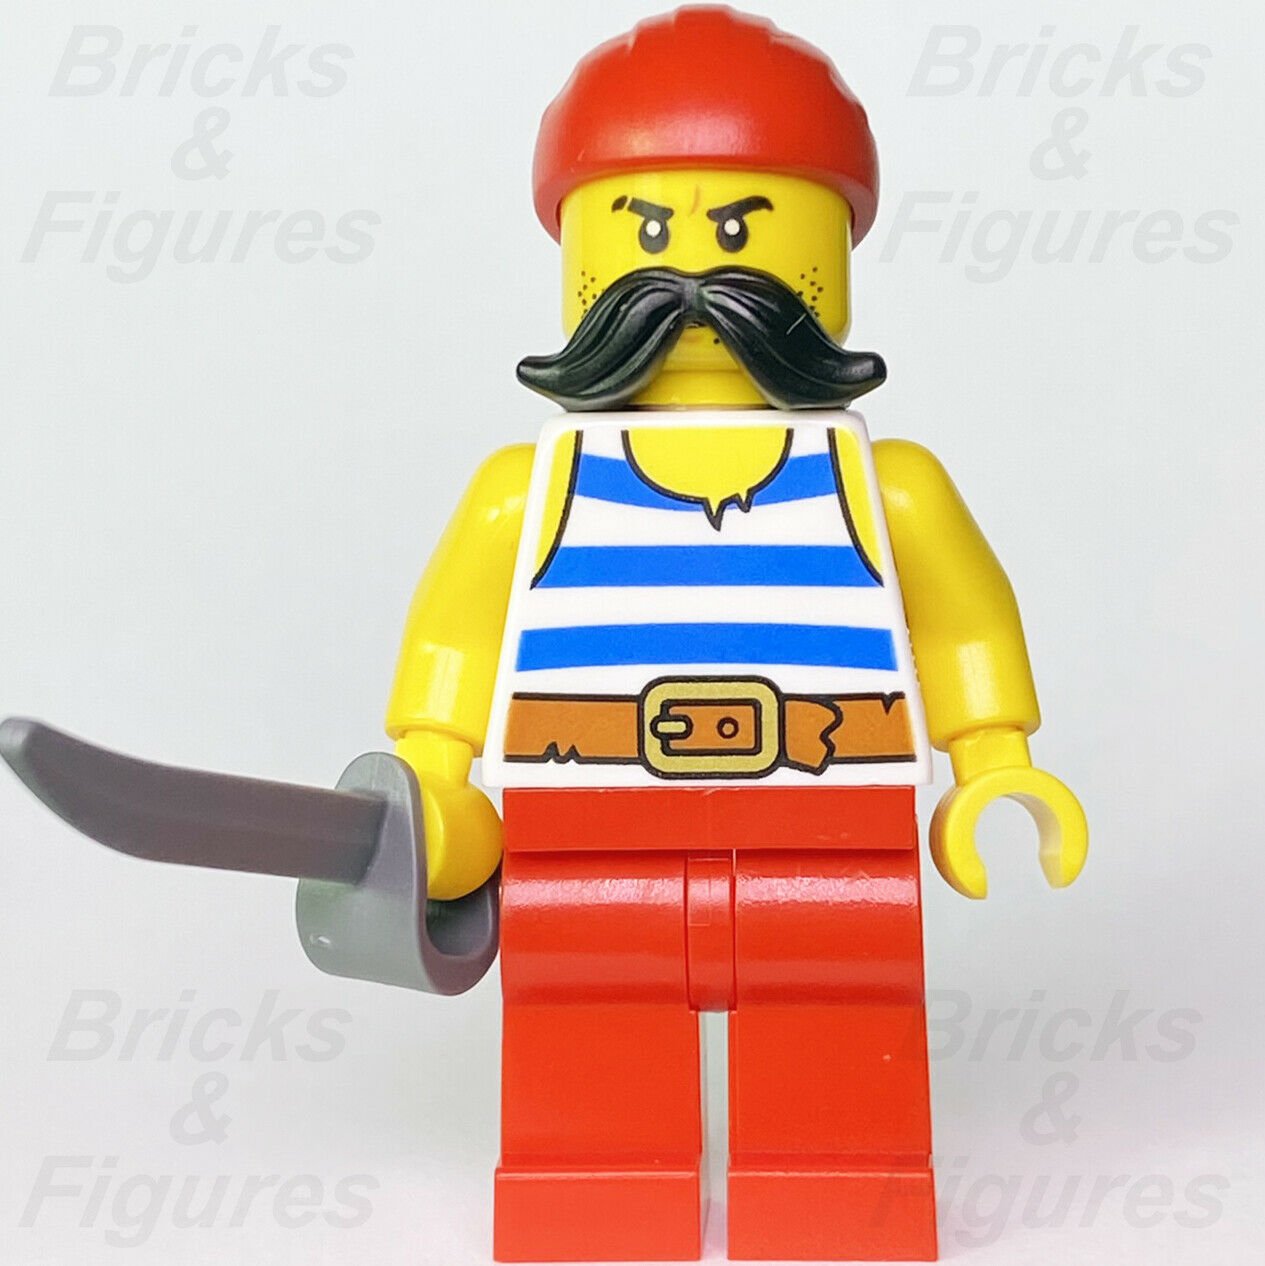 New Ideas LEGO Starboard Pirates Minifigure with Sword from set 21322 idea068 - Bricks & Figures